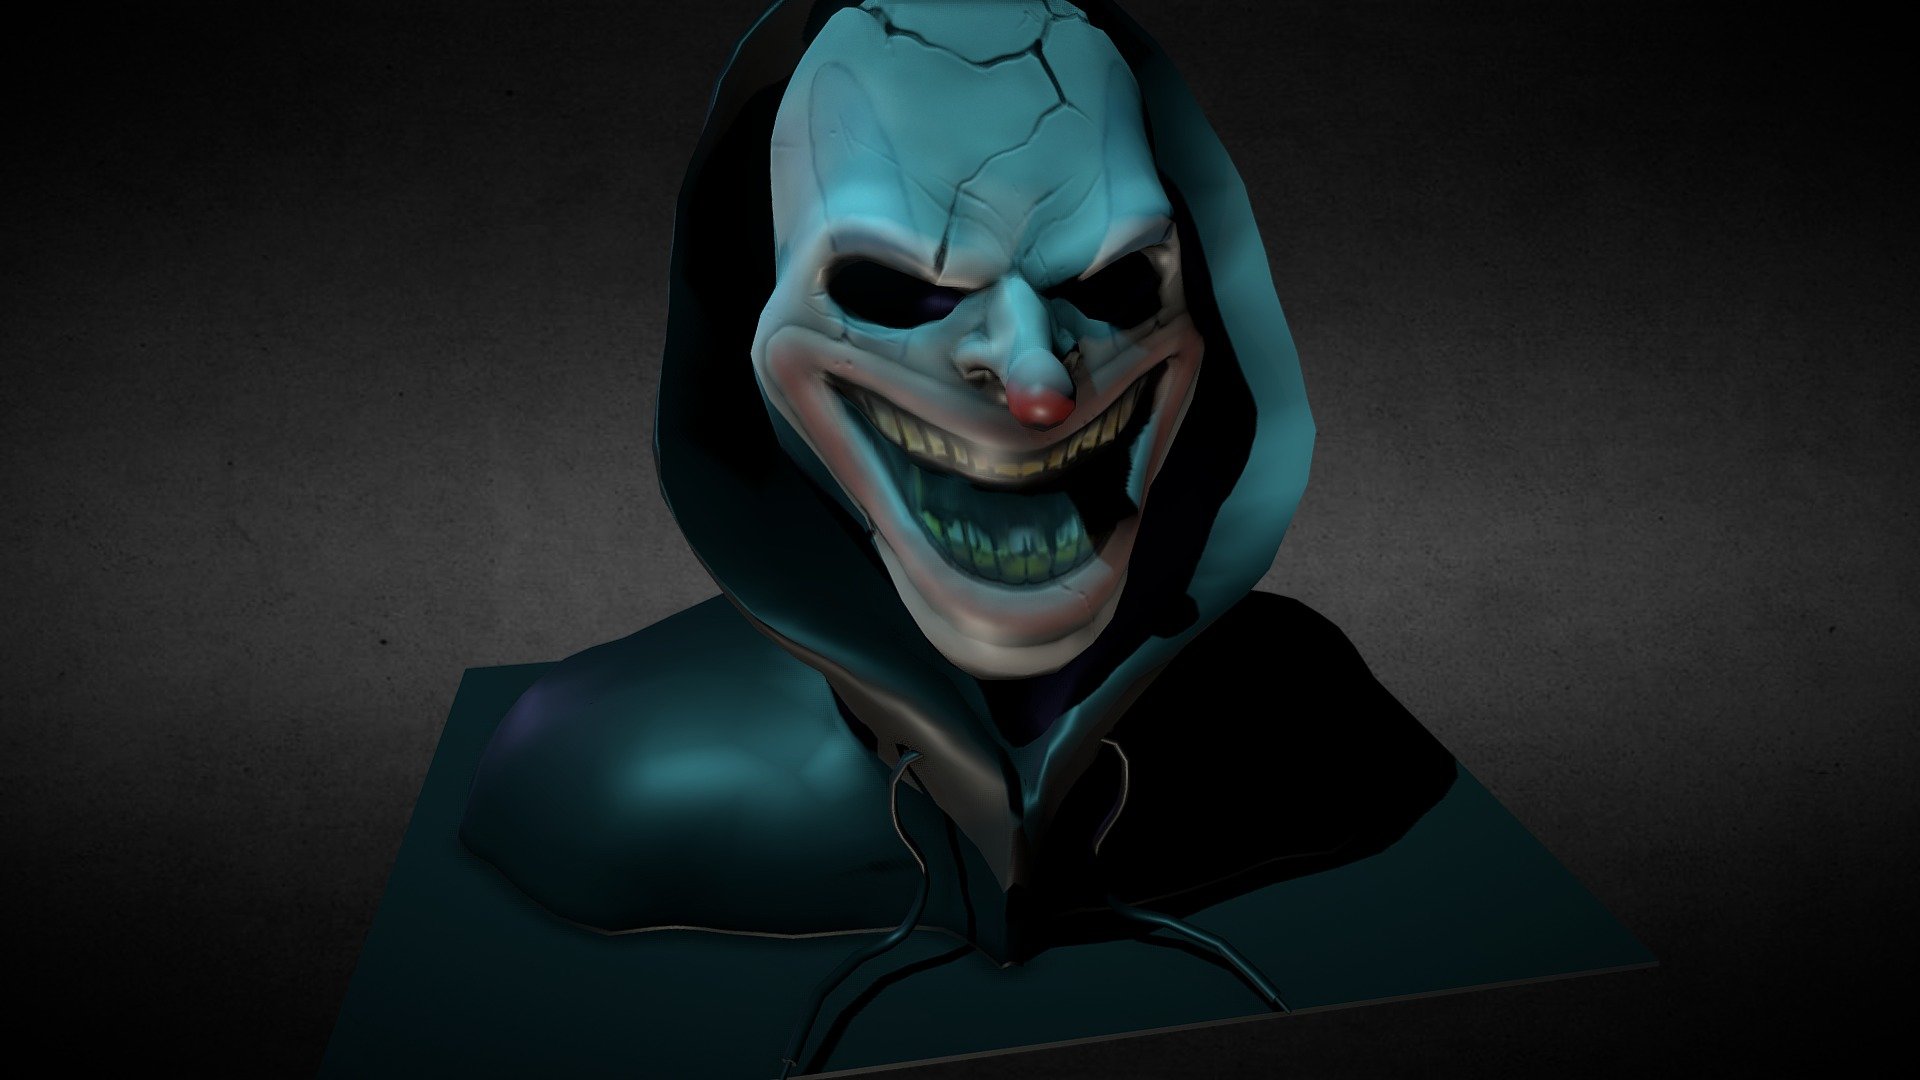 Here is the laughing clown featured in the American Horror Story Zoetrope at SDCC - The Laughing Clown (AHS) - 3D model by SiliconStorm 3d model